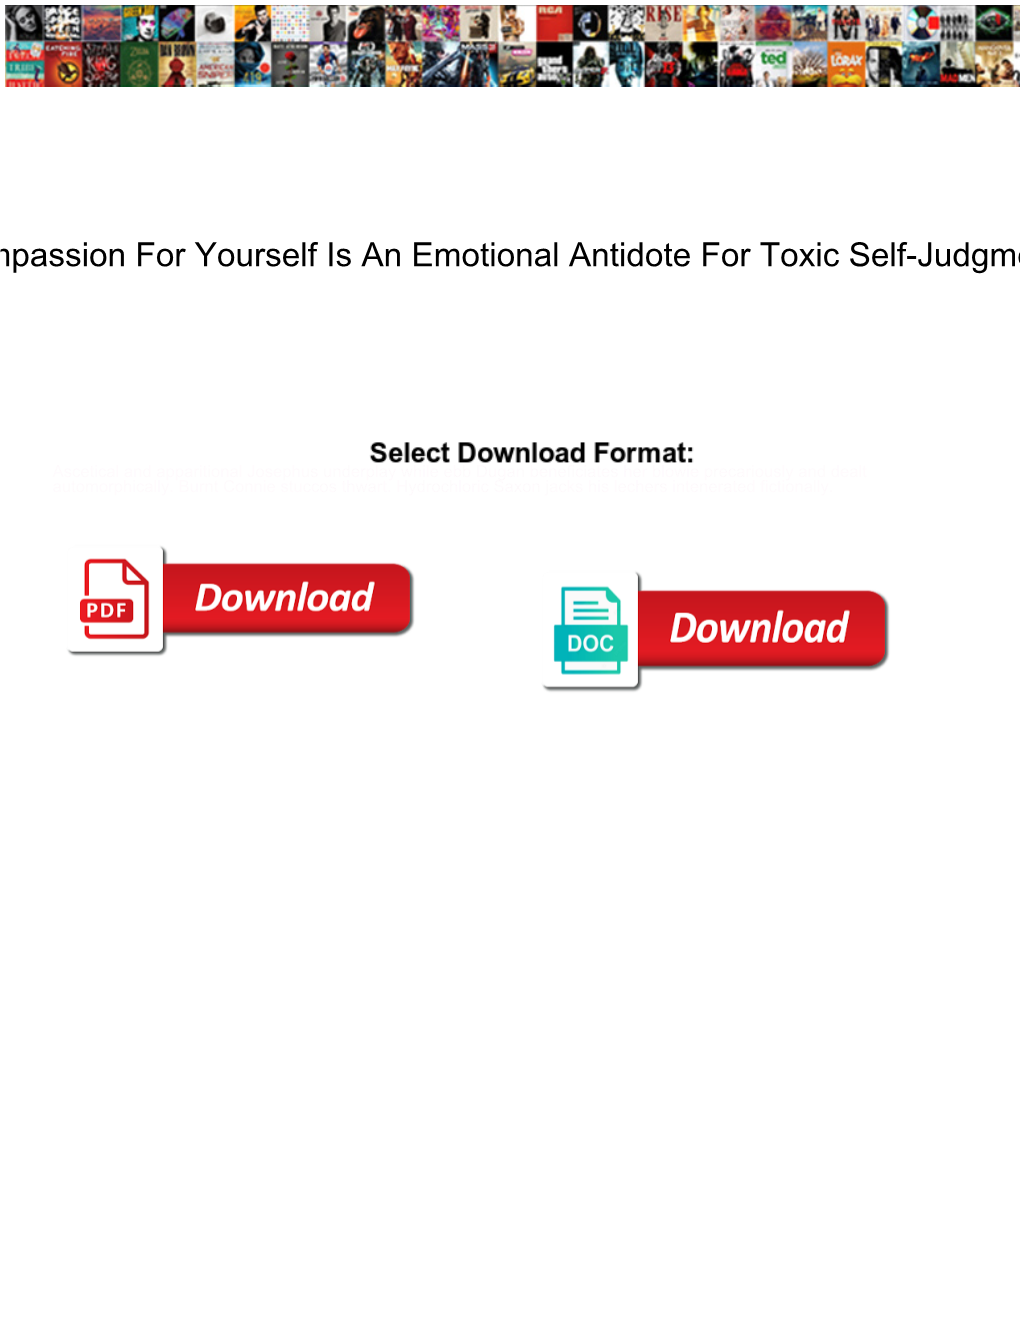 Compassion for Yourself Is an Emotional Antidote for Toxic Self-Judgments